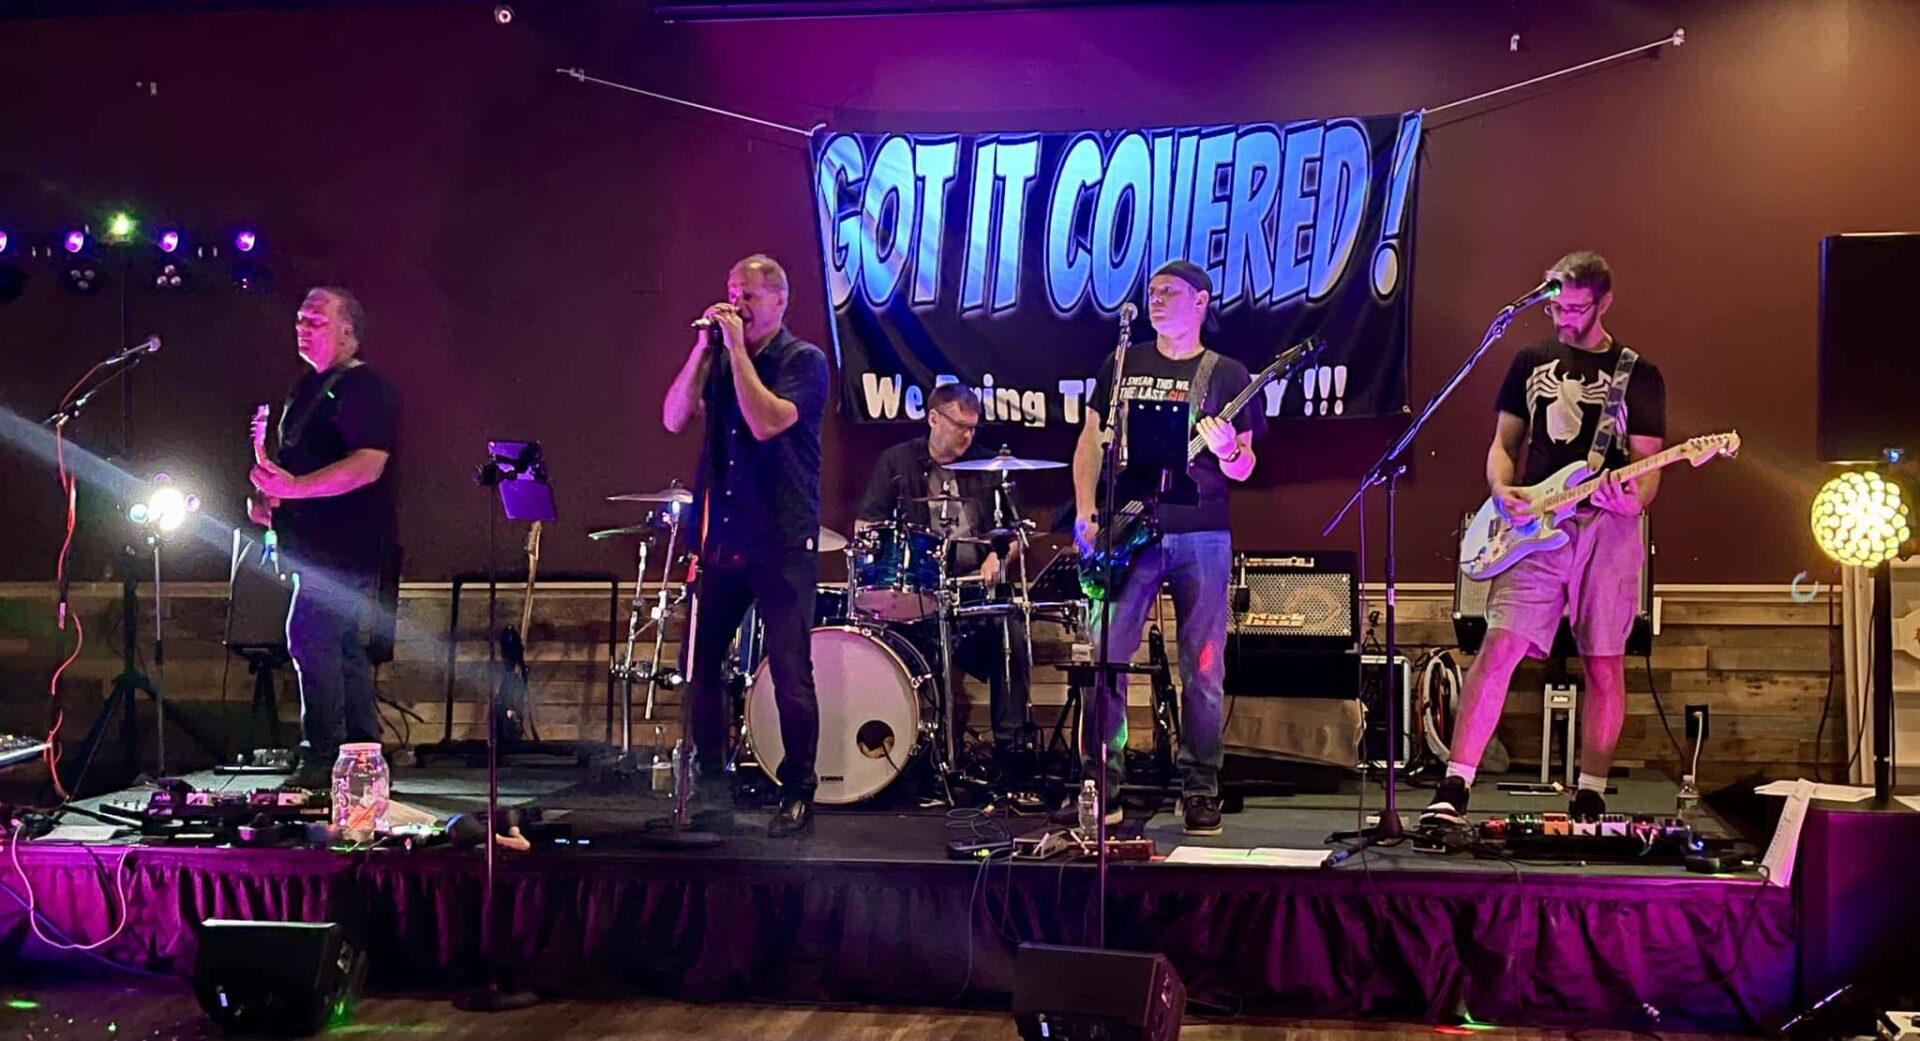 A band performing on stage with the words " got it covered ".